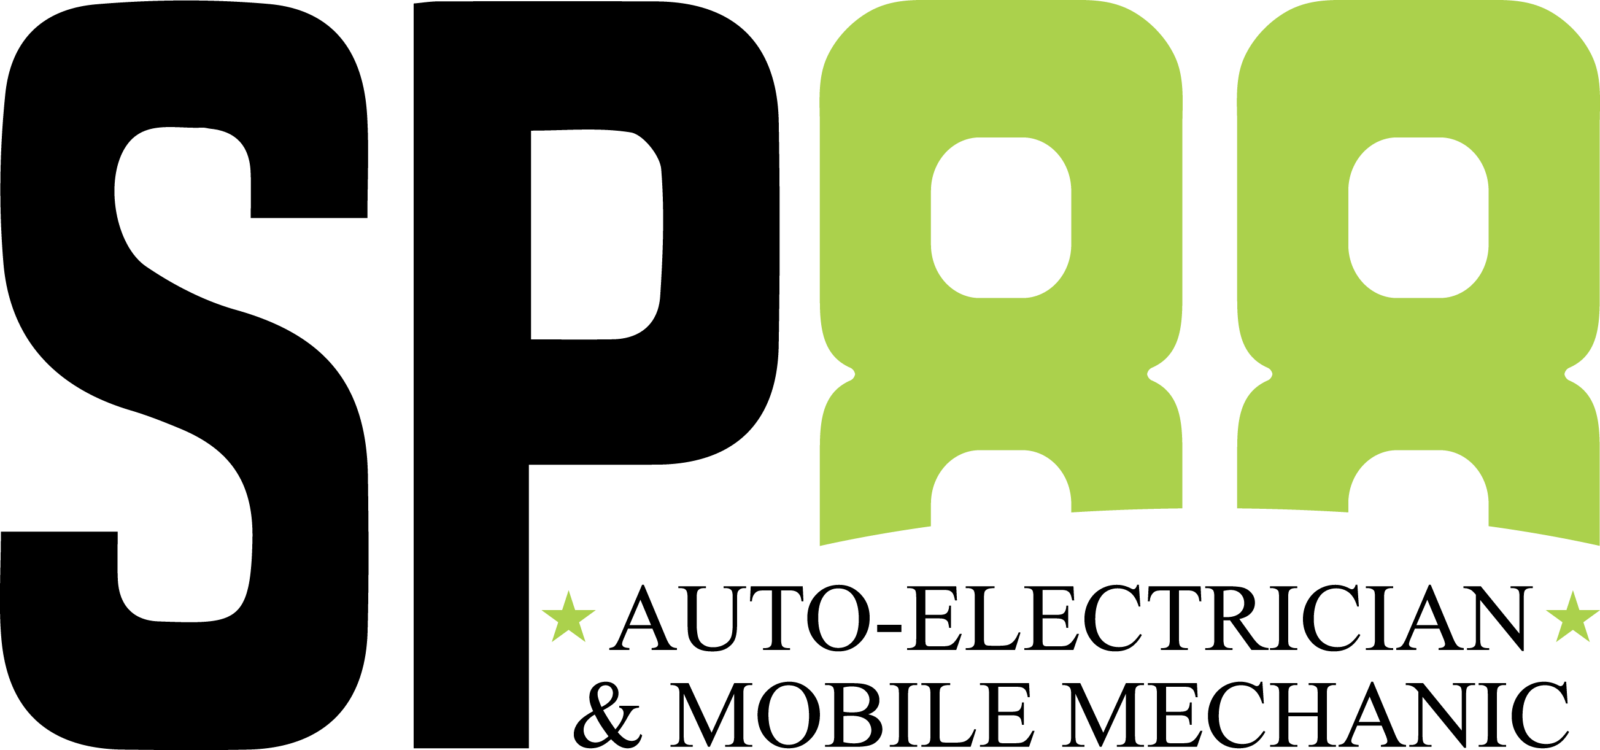 Auto Electrician & Mobile Mechanic in London